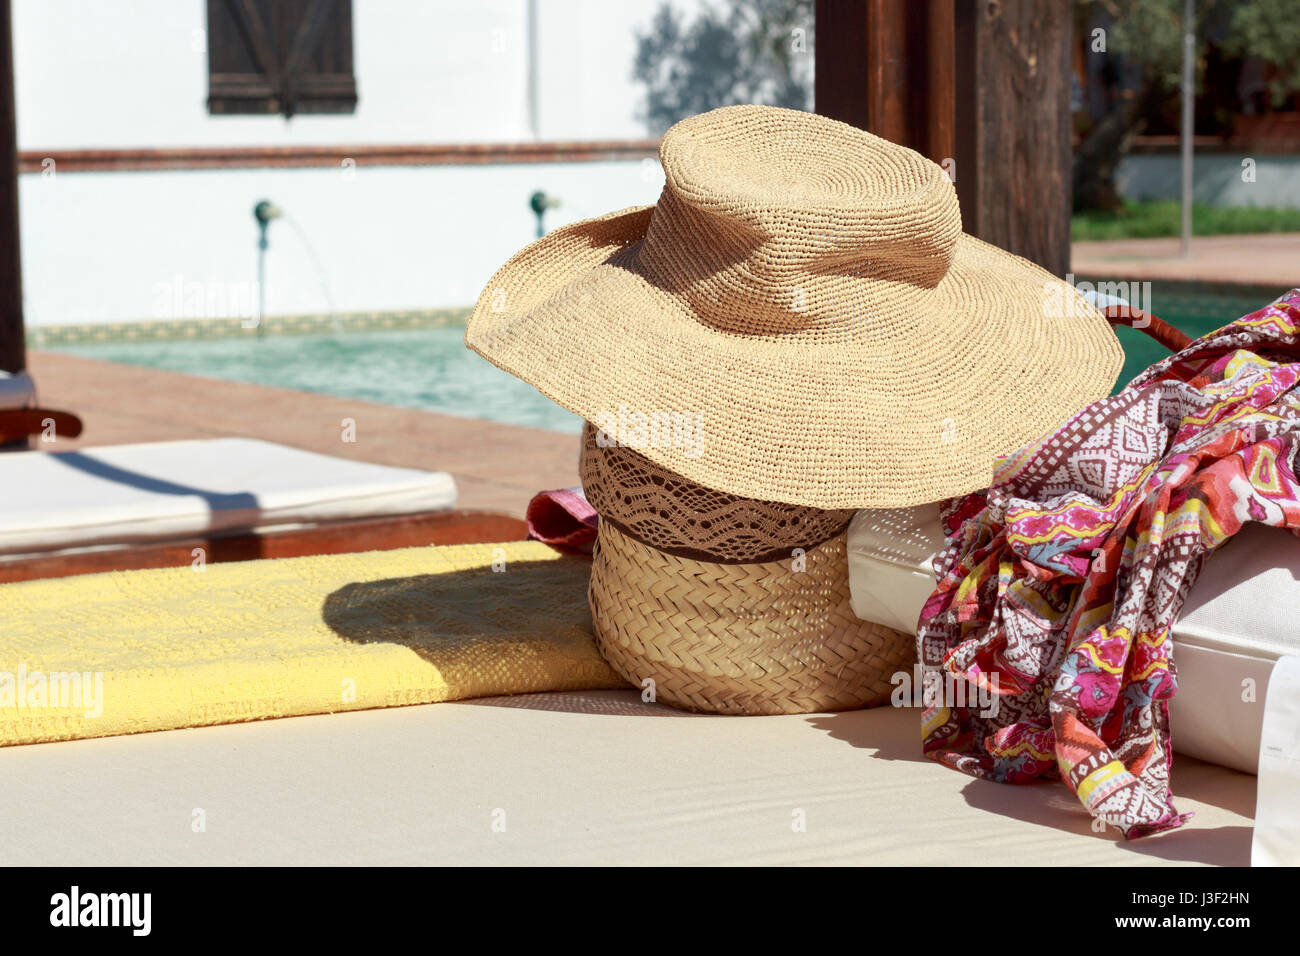 Sun hat, beach bag and pareo on deck chair beside a swimming pool Stock Photo